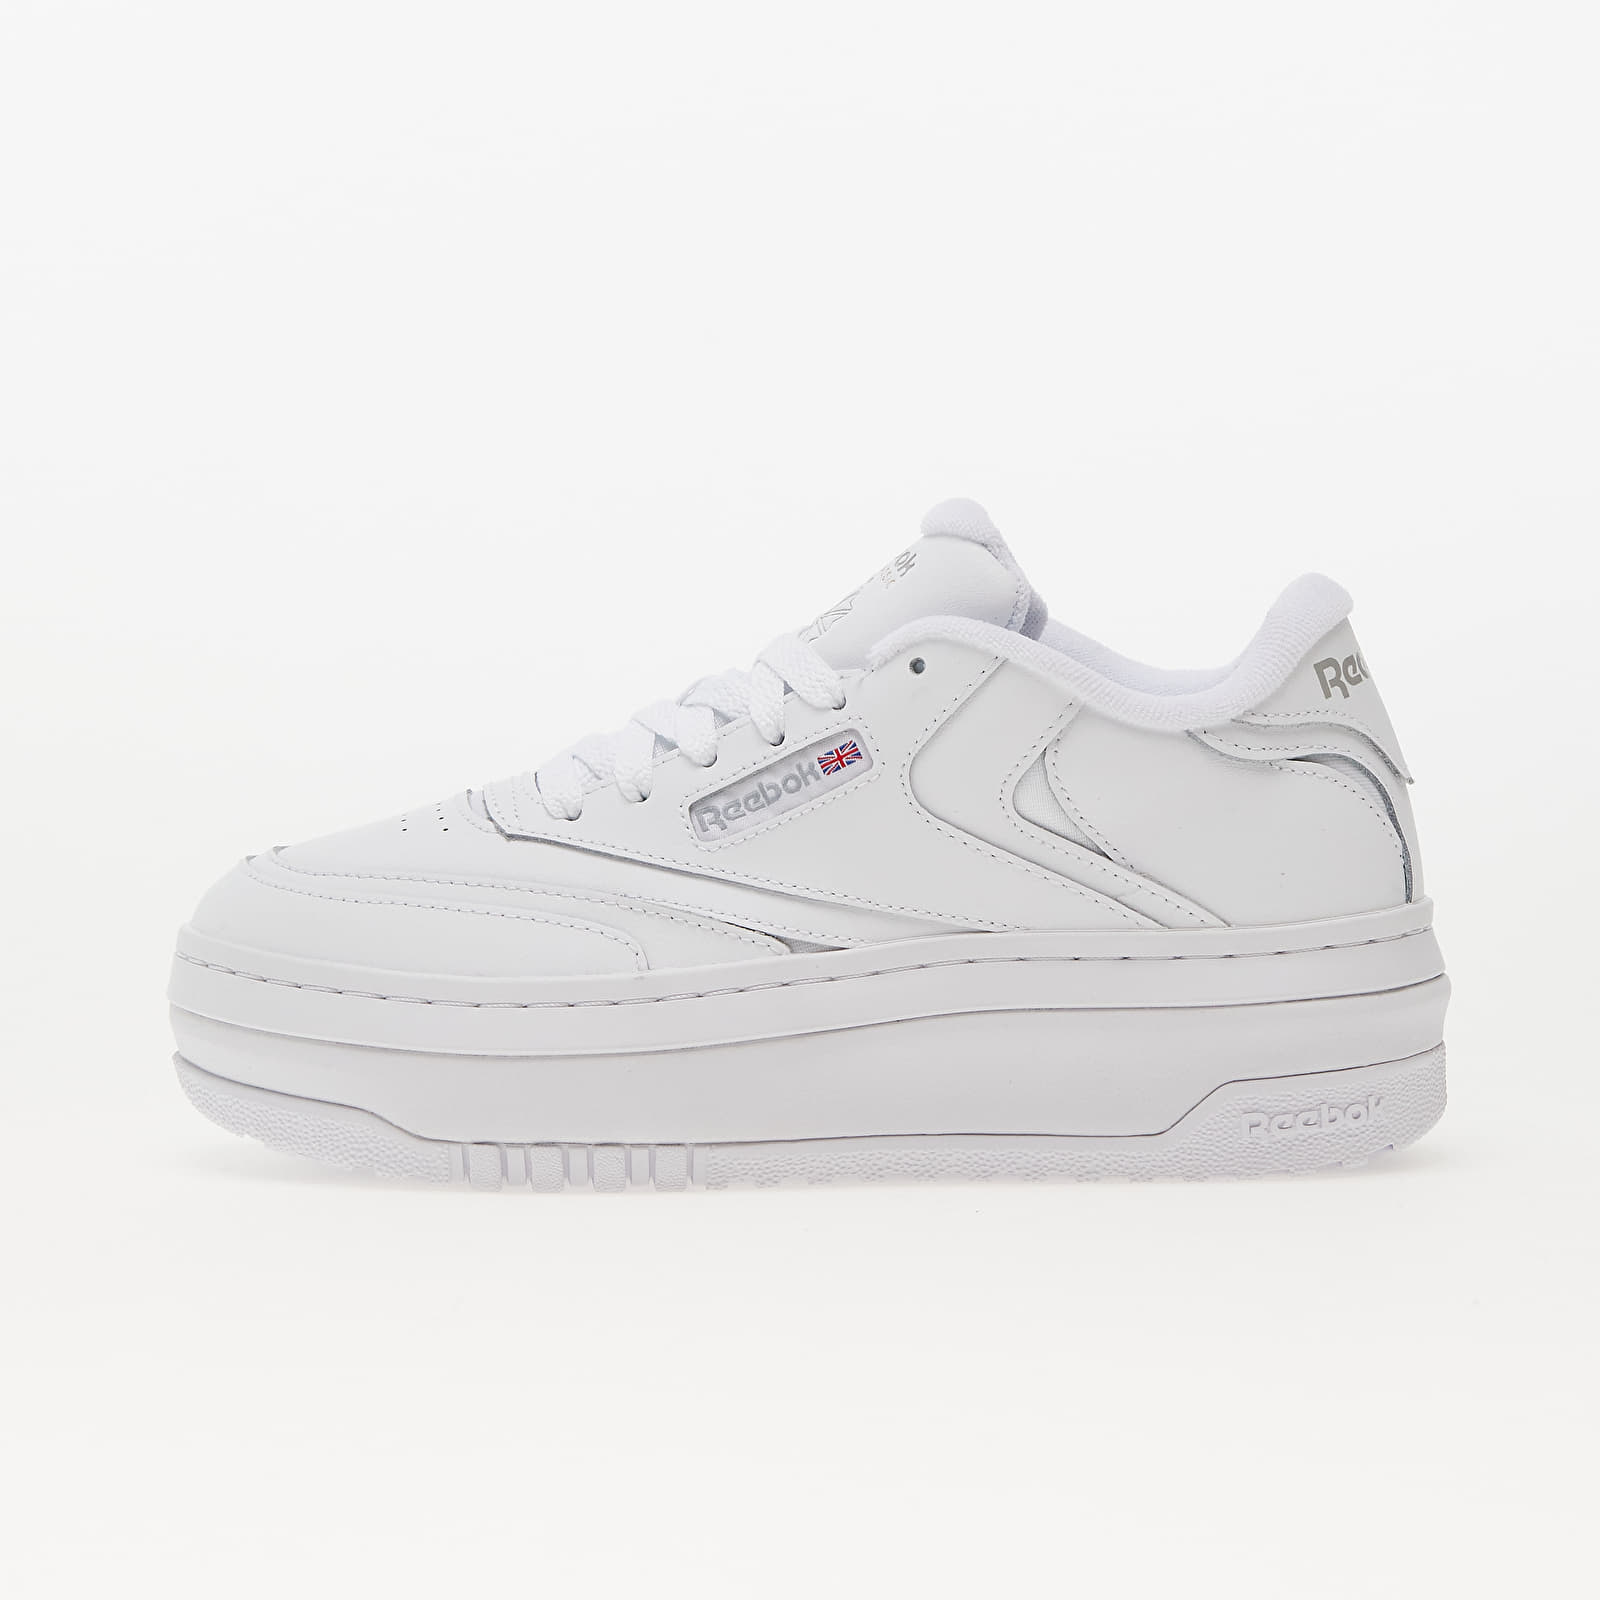 Chaussures et baskets femme Reebok Club C Extra Ftw White/ ftw White/ Pure Grey